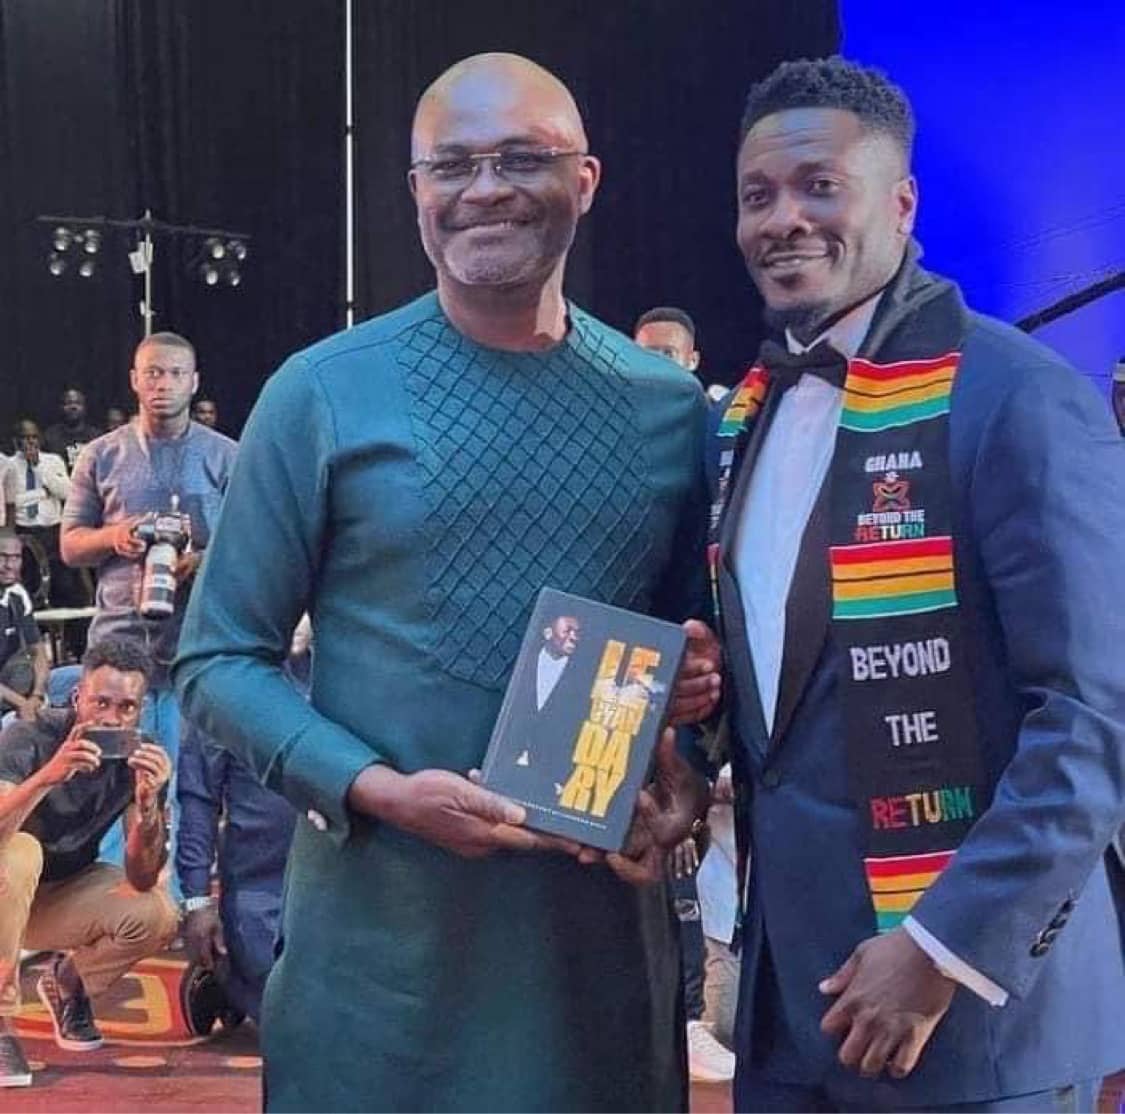 Kennedy Agyapong buys first copy of Asamoah Gyan's book for Ghs 100,000